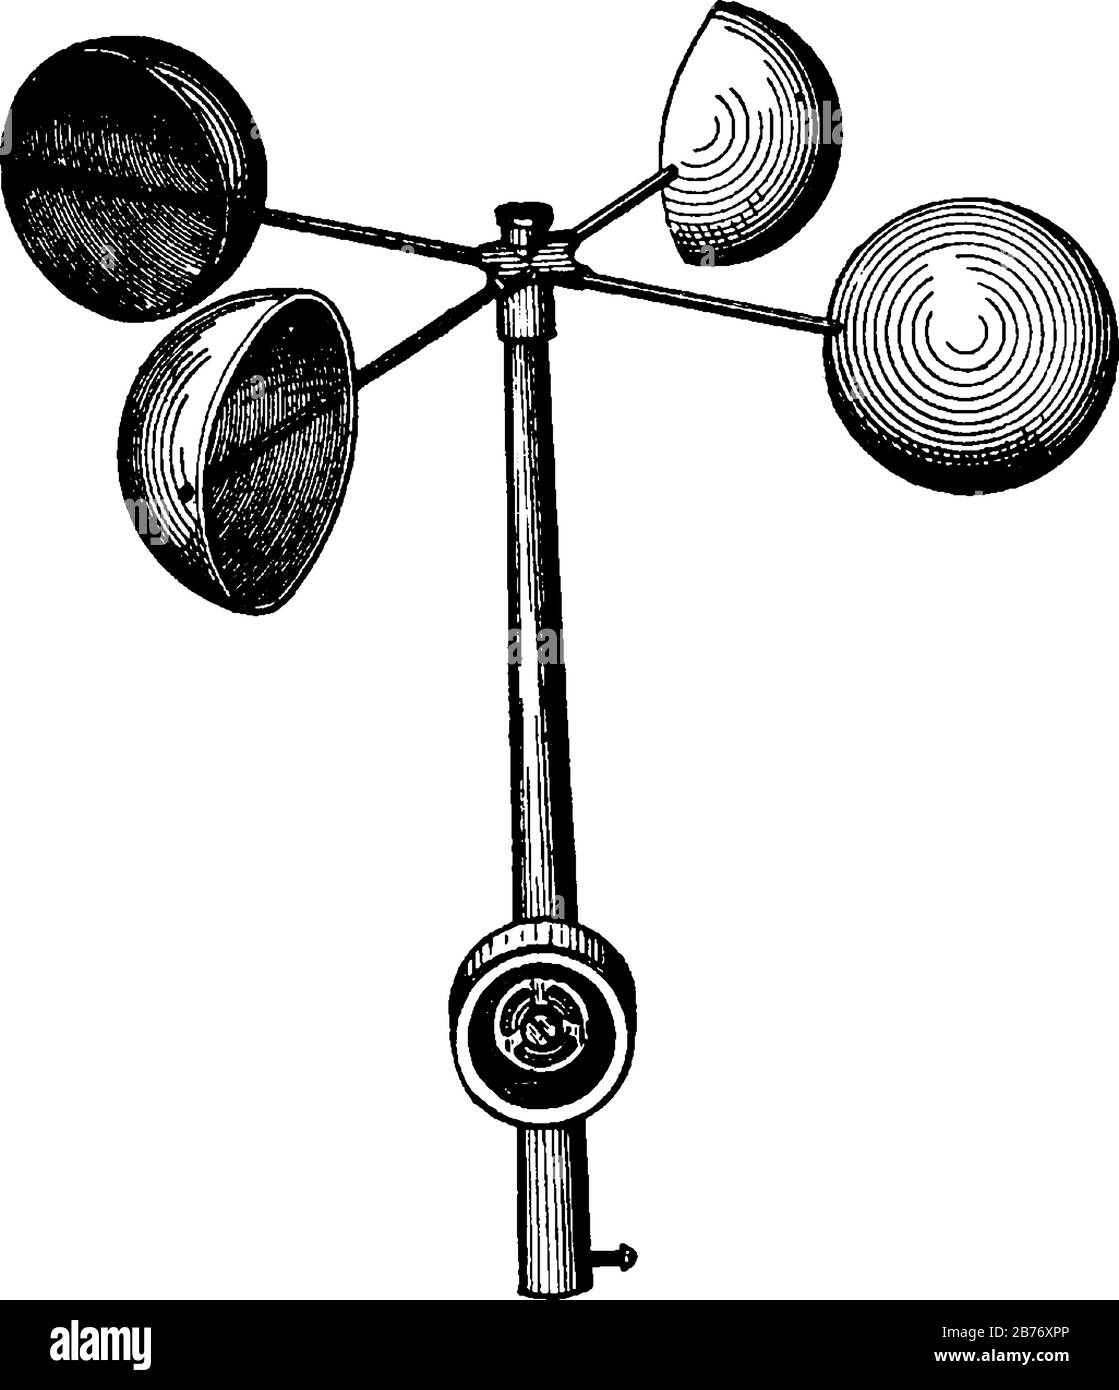 The anemometer is an instrument used to measure the velocity of the wind, the wind speed, and is also a common weather station instrument, vintage lin Stock Vector